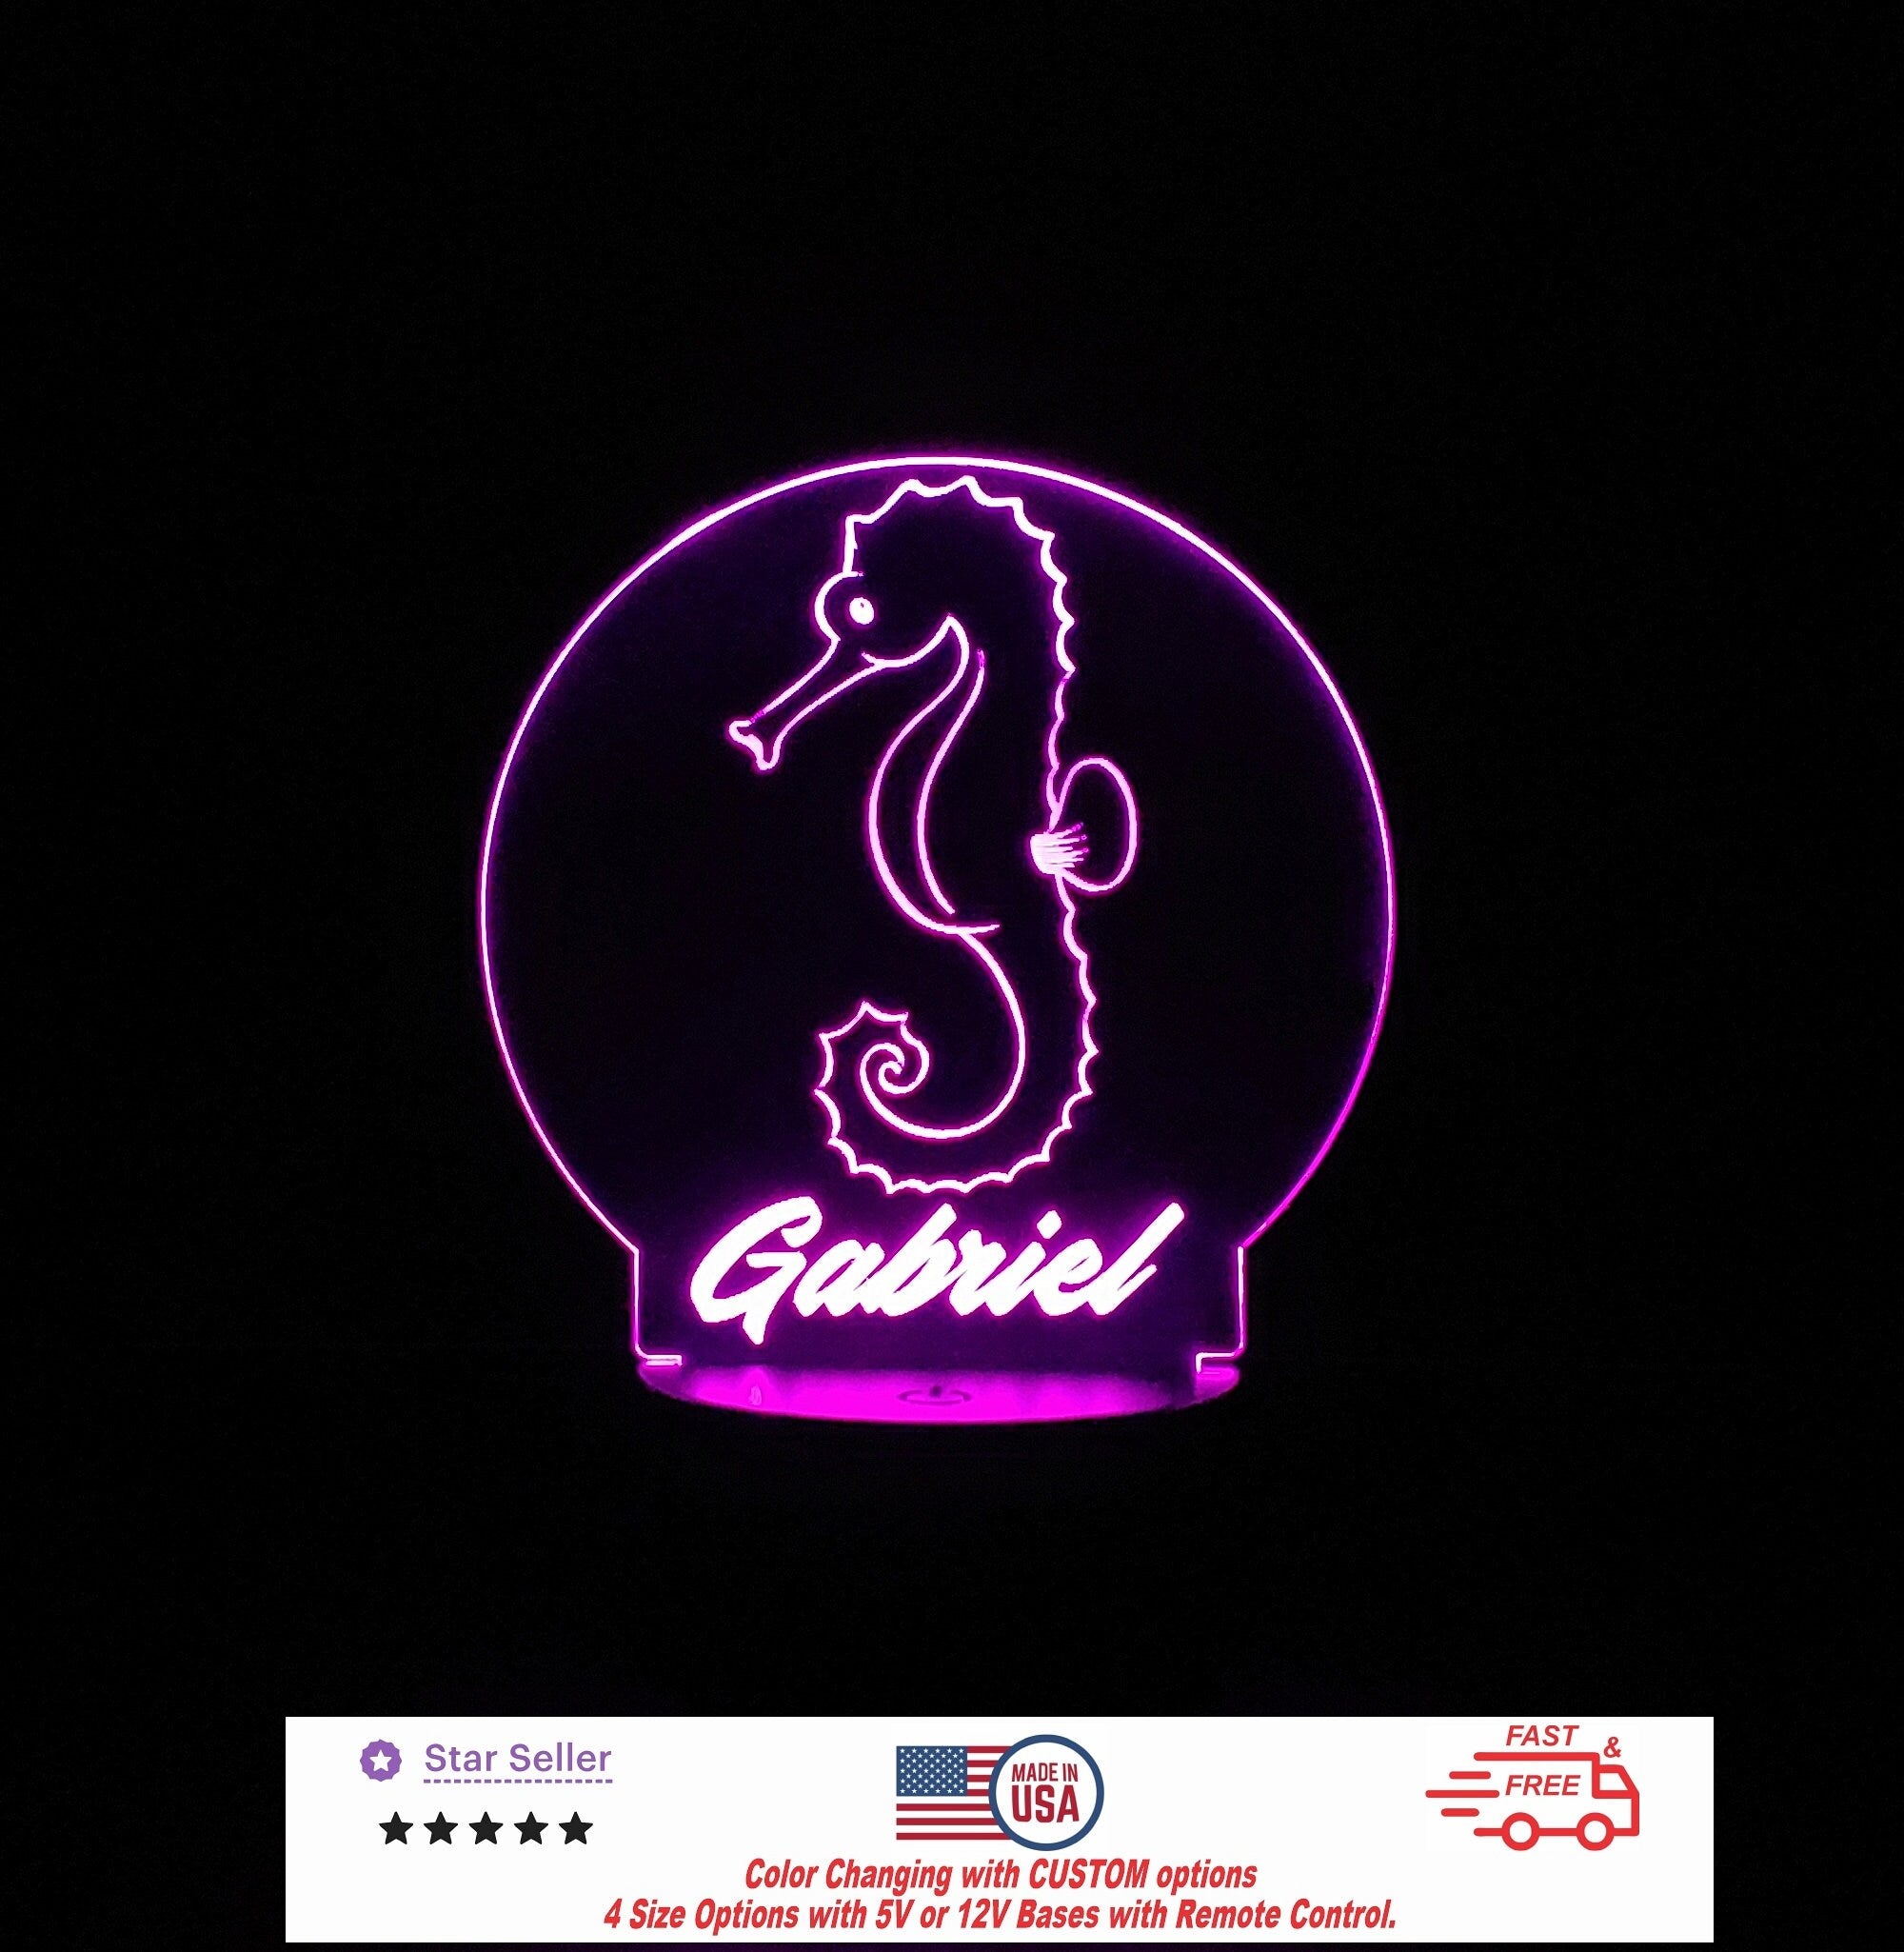 Custom Baby Sea Horse Personalized LED Night Light - Neon sign, Room Decor, Party Enhancer, Nursery, Kids' Room, Free Shipping Made in USA